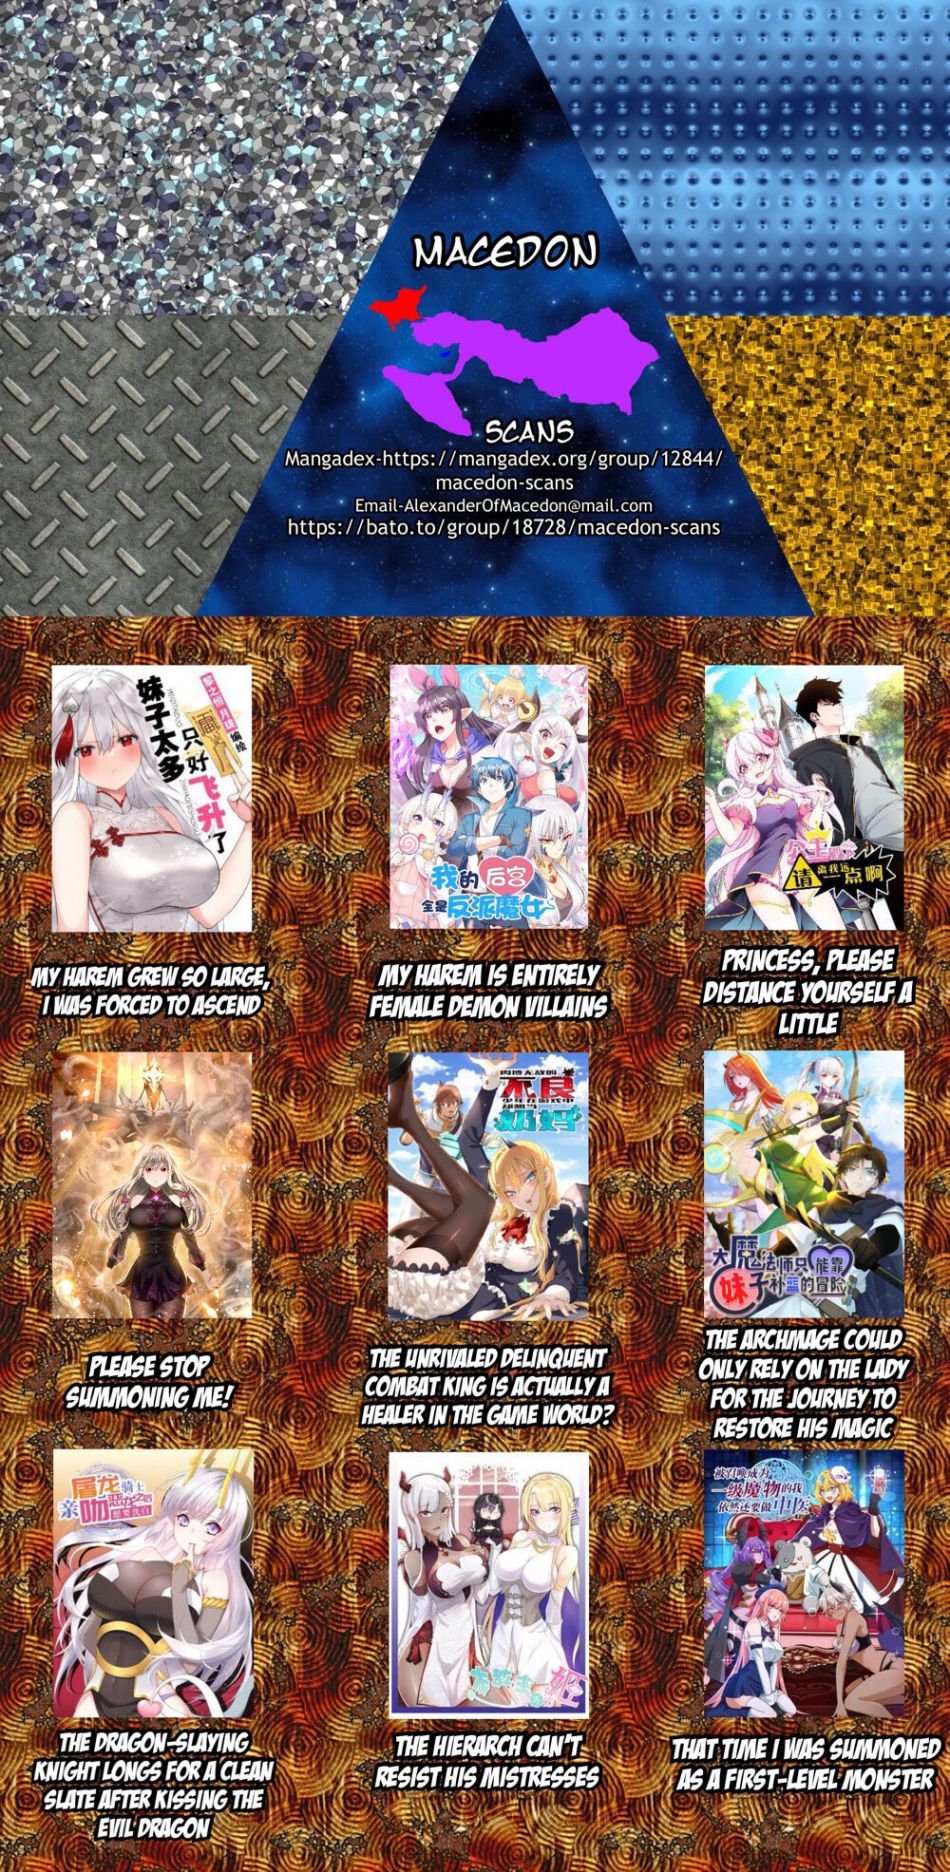 My Harem Is Entirely Female Demon Villains chapter 26